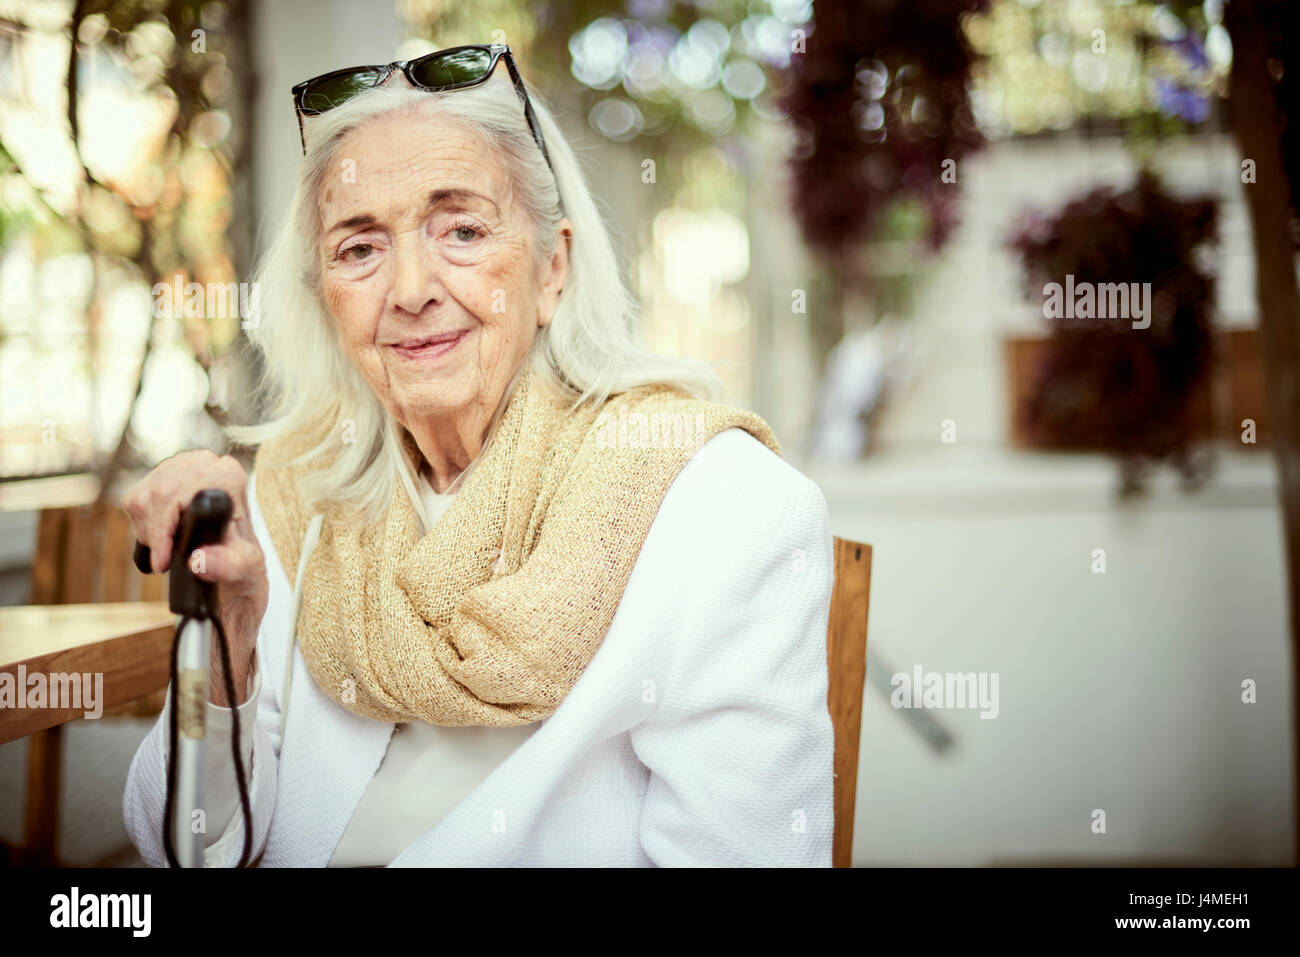 Portrait of smiling older Caucasian woman wearing scarf Stock Photo